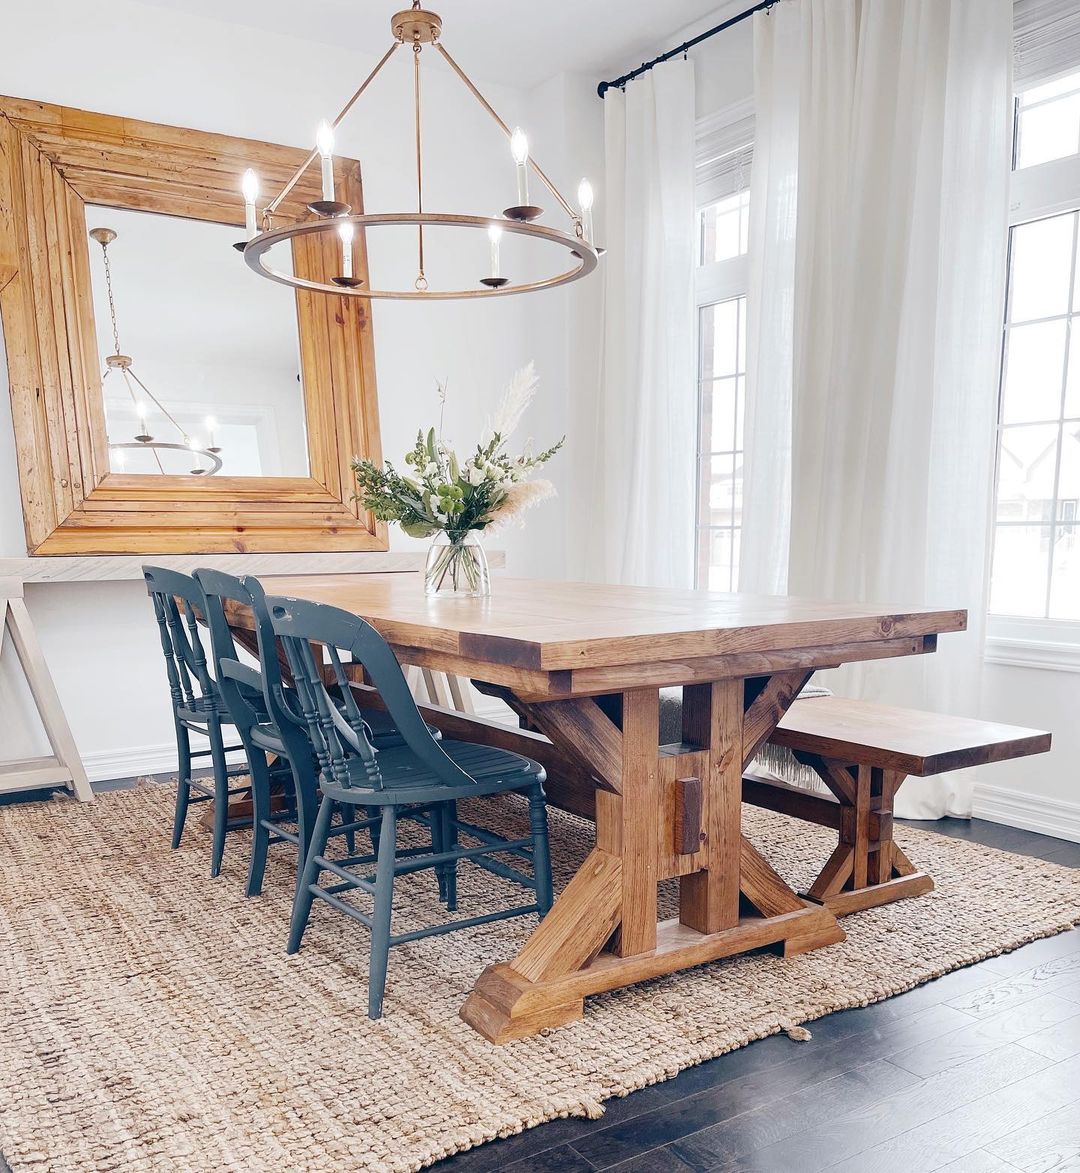 Dining Room with Large Farmhouse Style Gathering Table. Photo by Instagram user @alexanderdesignsandco